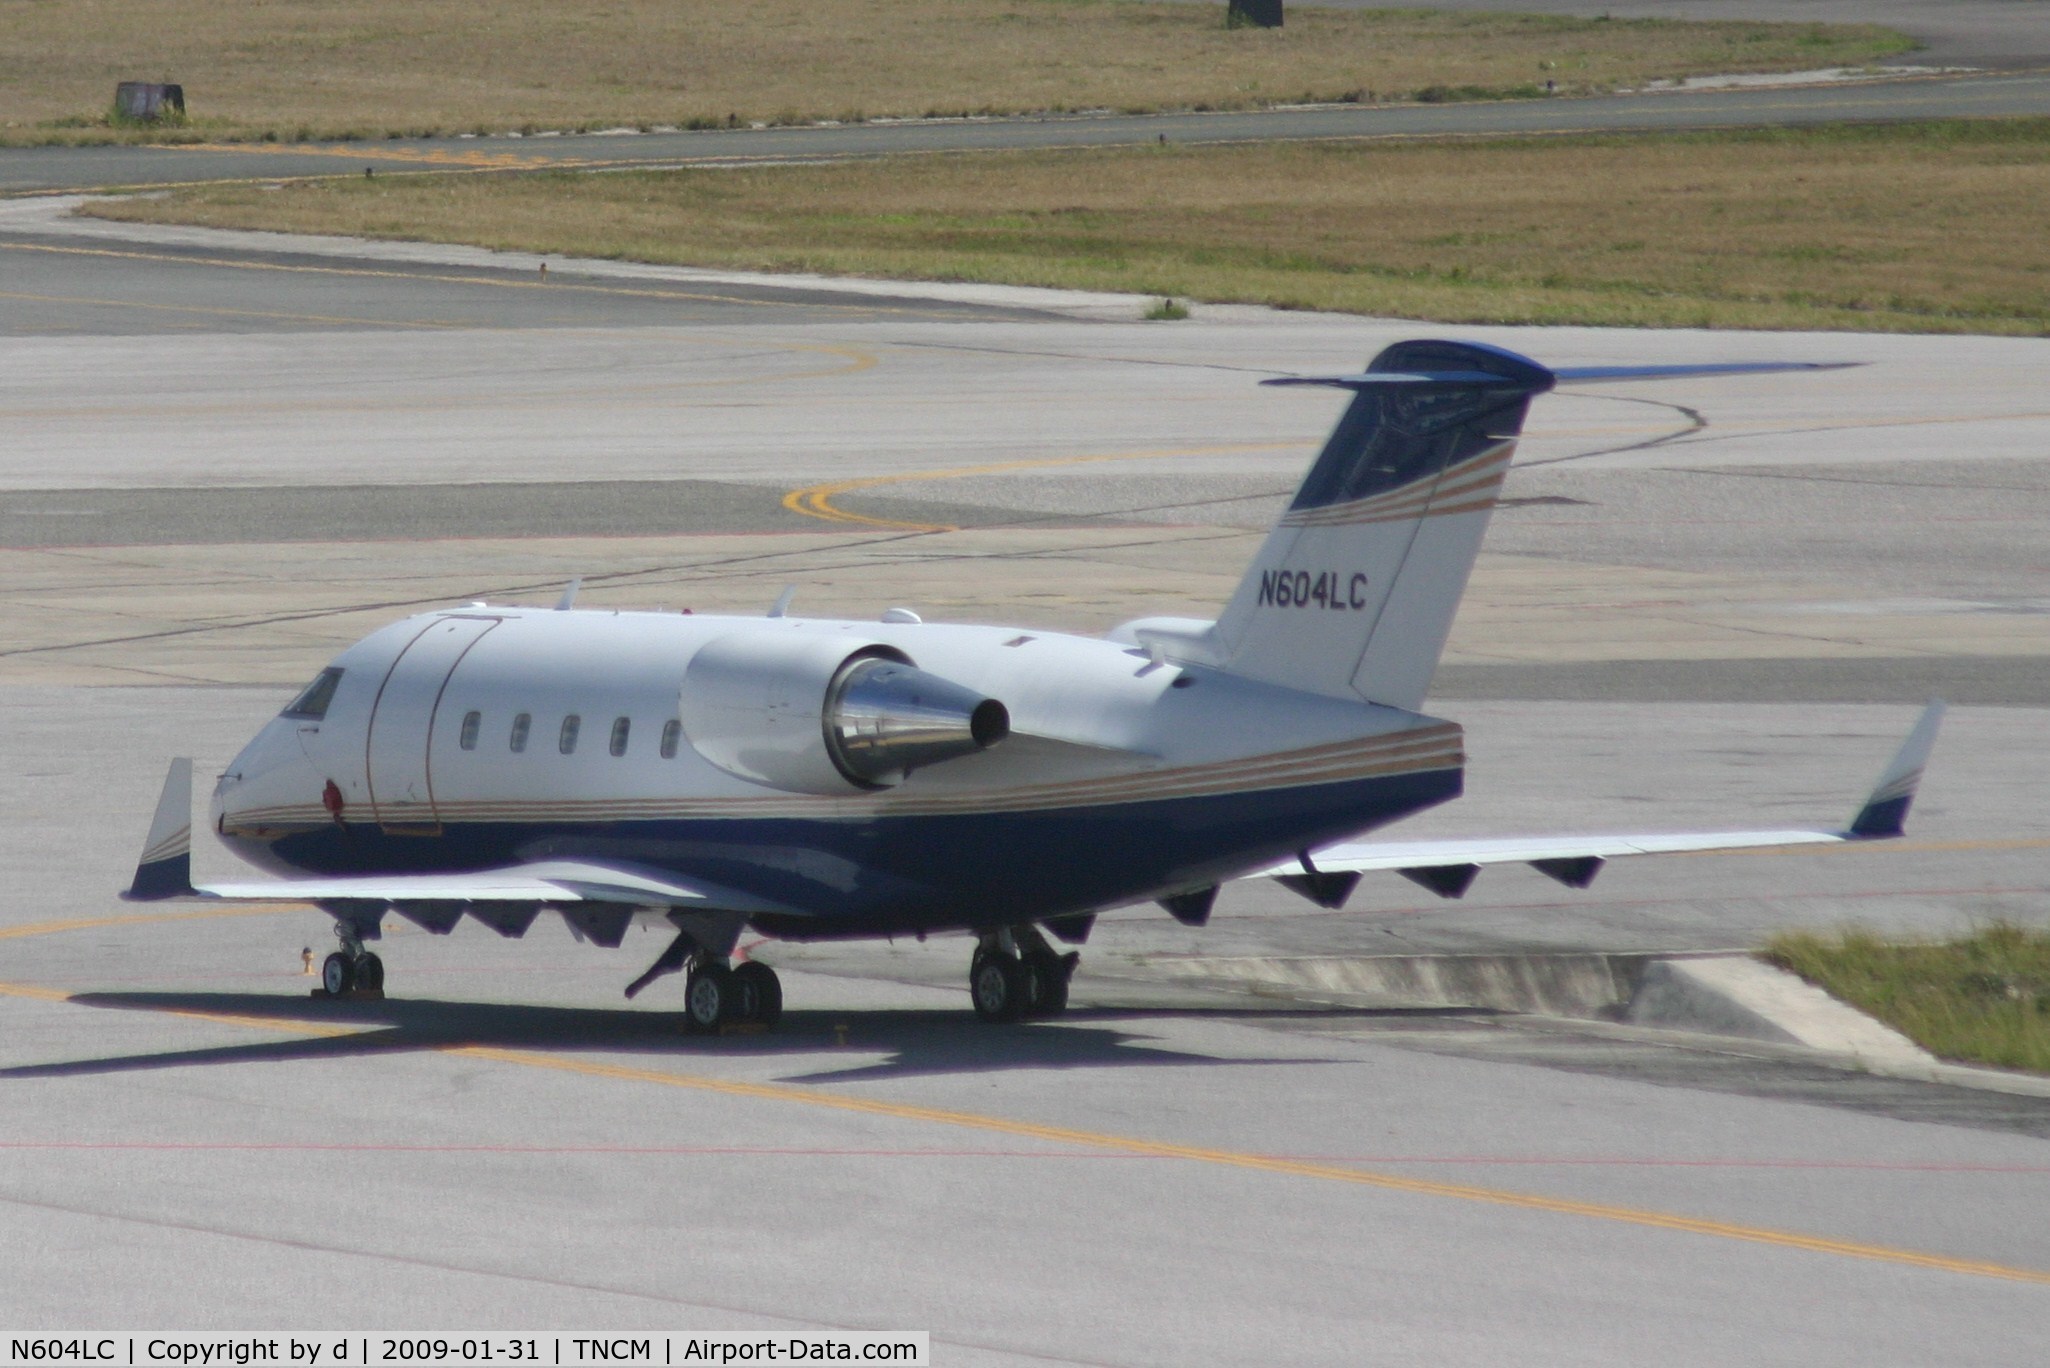 N604LC, 1998 Bombardier Challenger 604 (CL-600-2B16) C/N 5373, park at the ramp